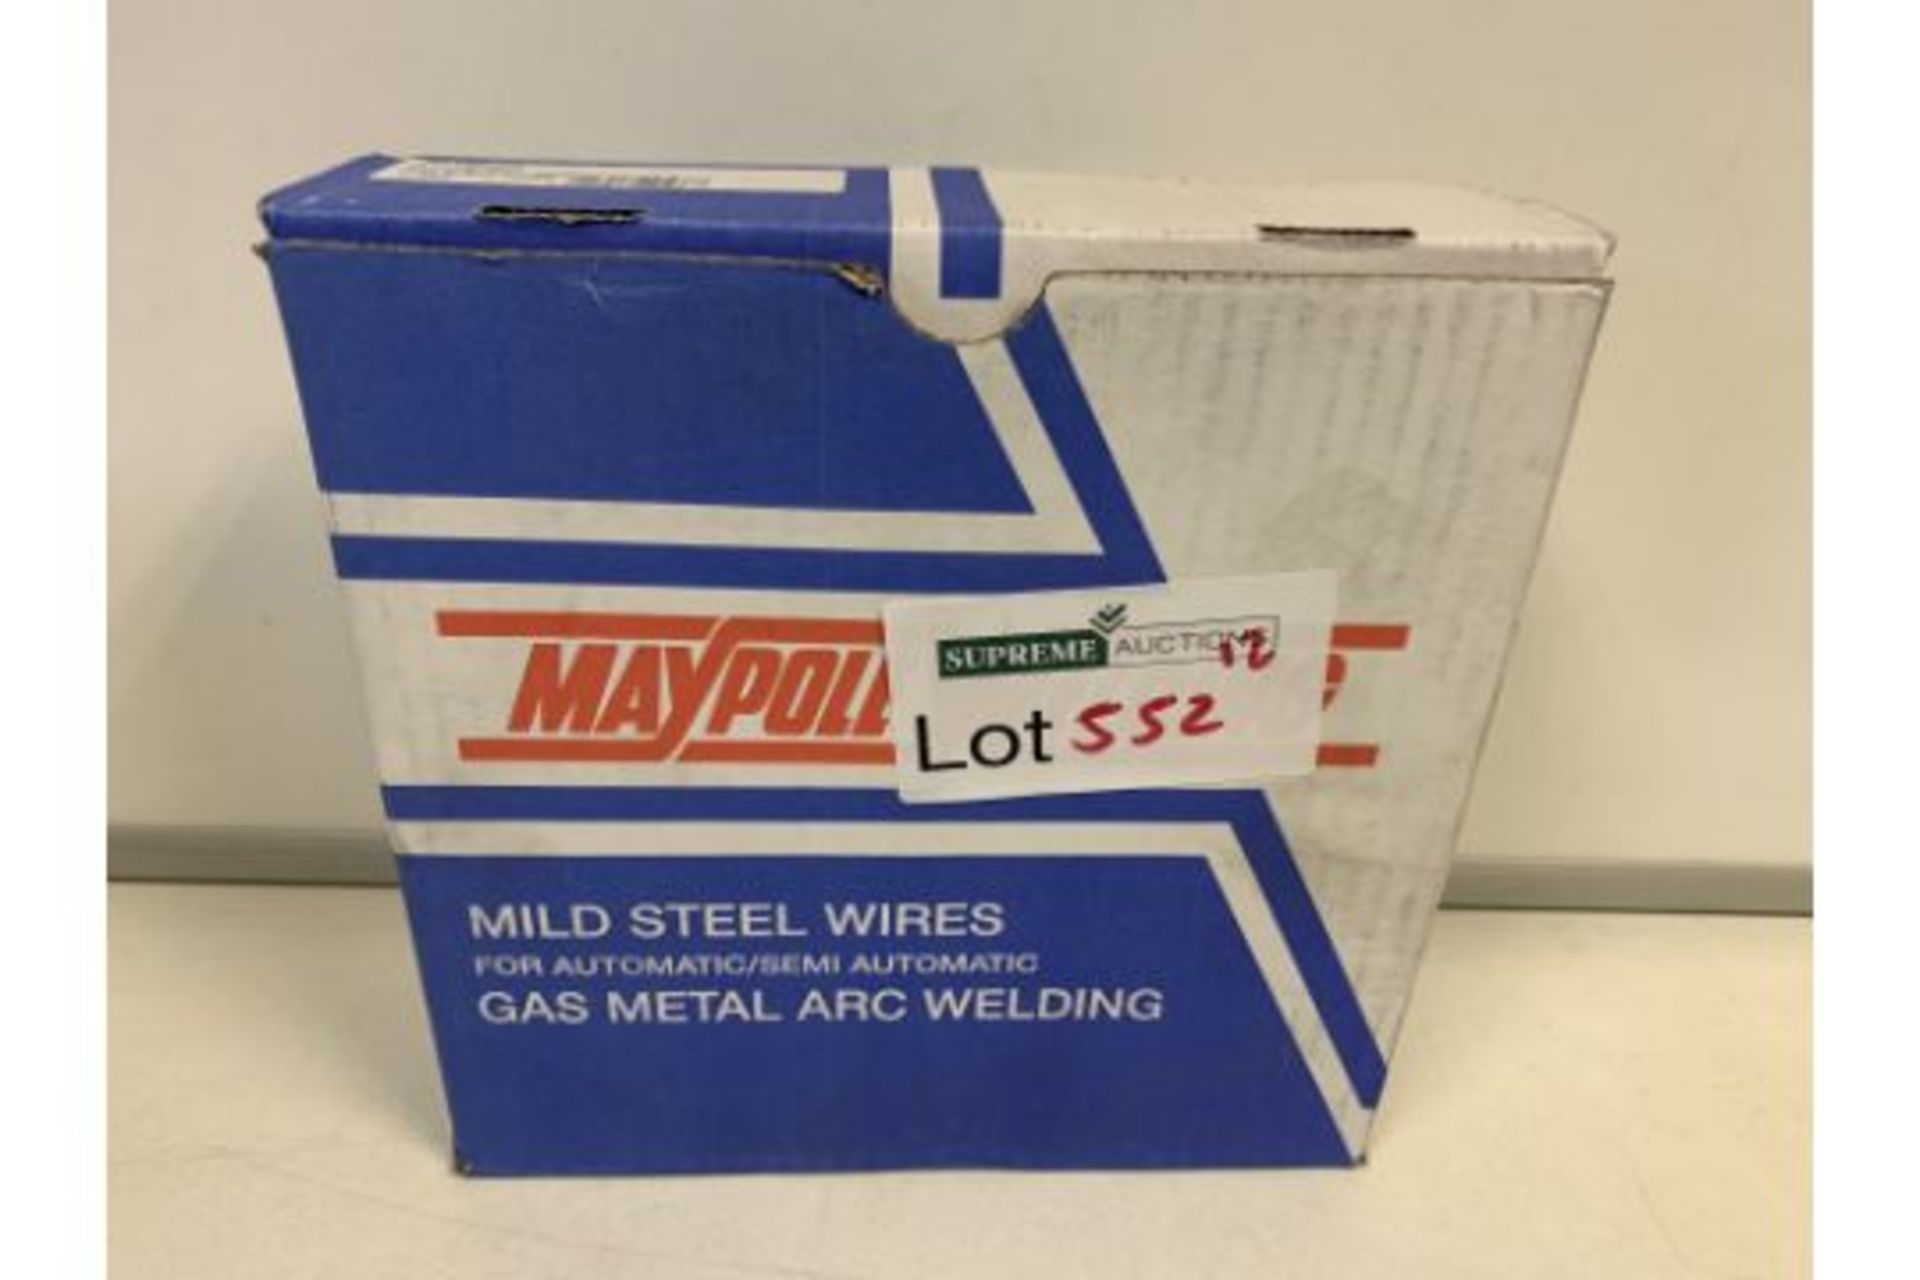 4 X BRAND NEW MAYPOLE WELDING MILD STEEL WIRES FOR AUTOMATIC/SEMI AUTOMATIC GAS METAL ARC WELDING (